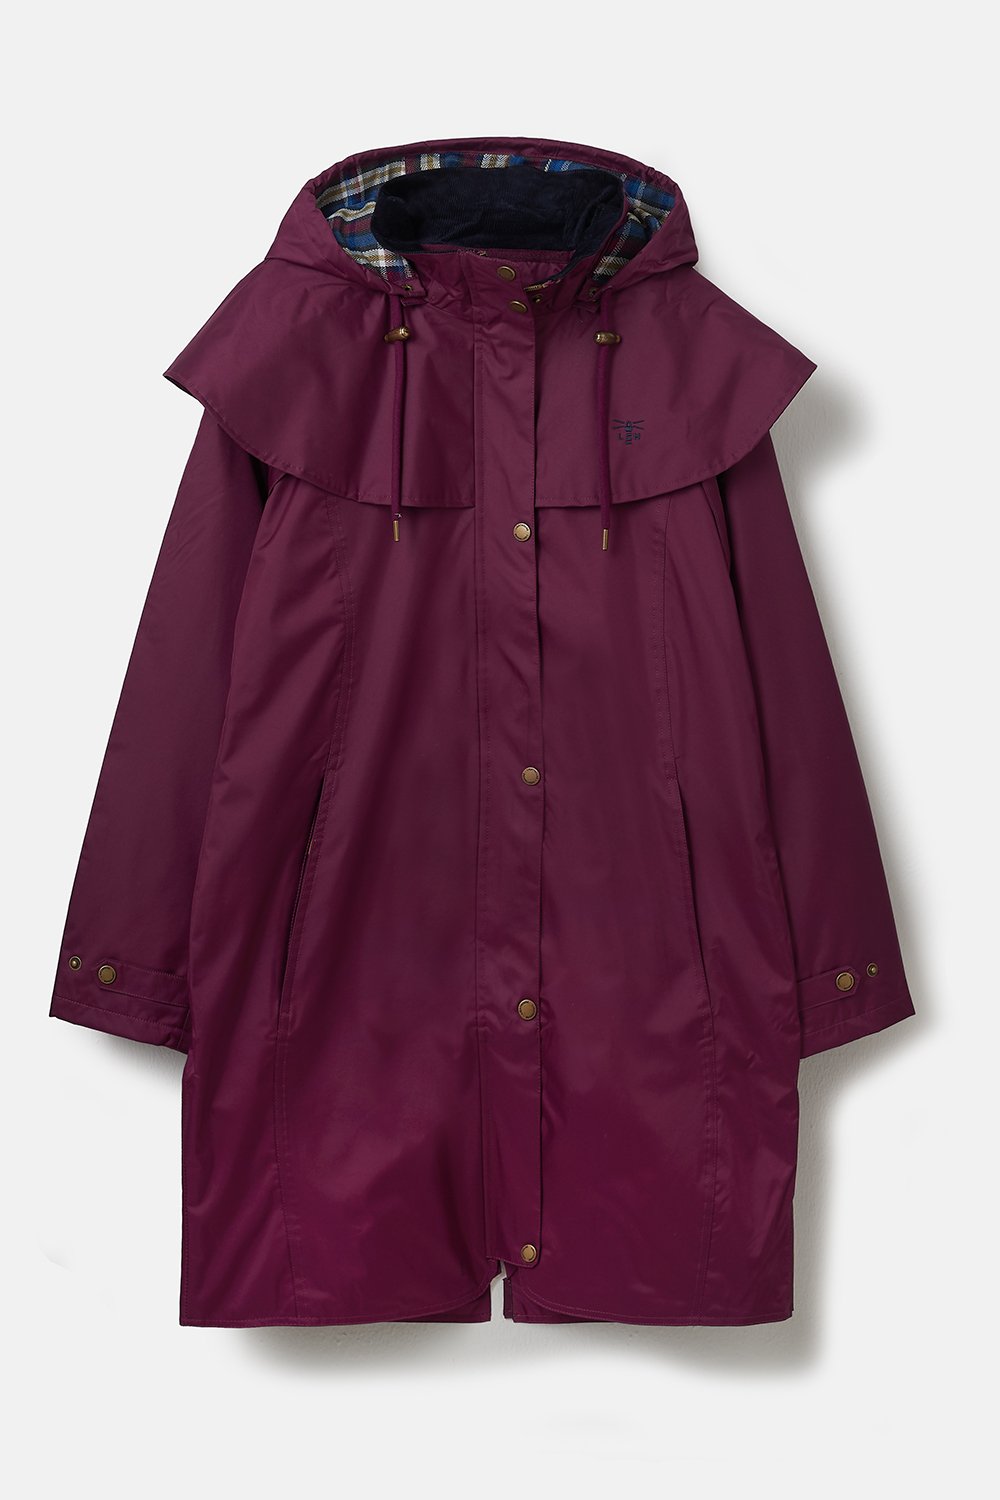 Lighthouse Outrider 3/4 Length Waterproof Raincoat